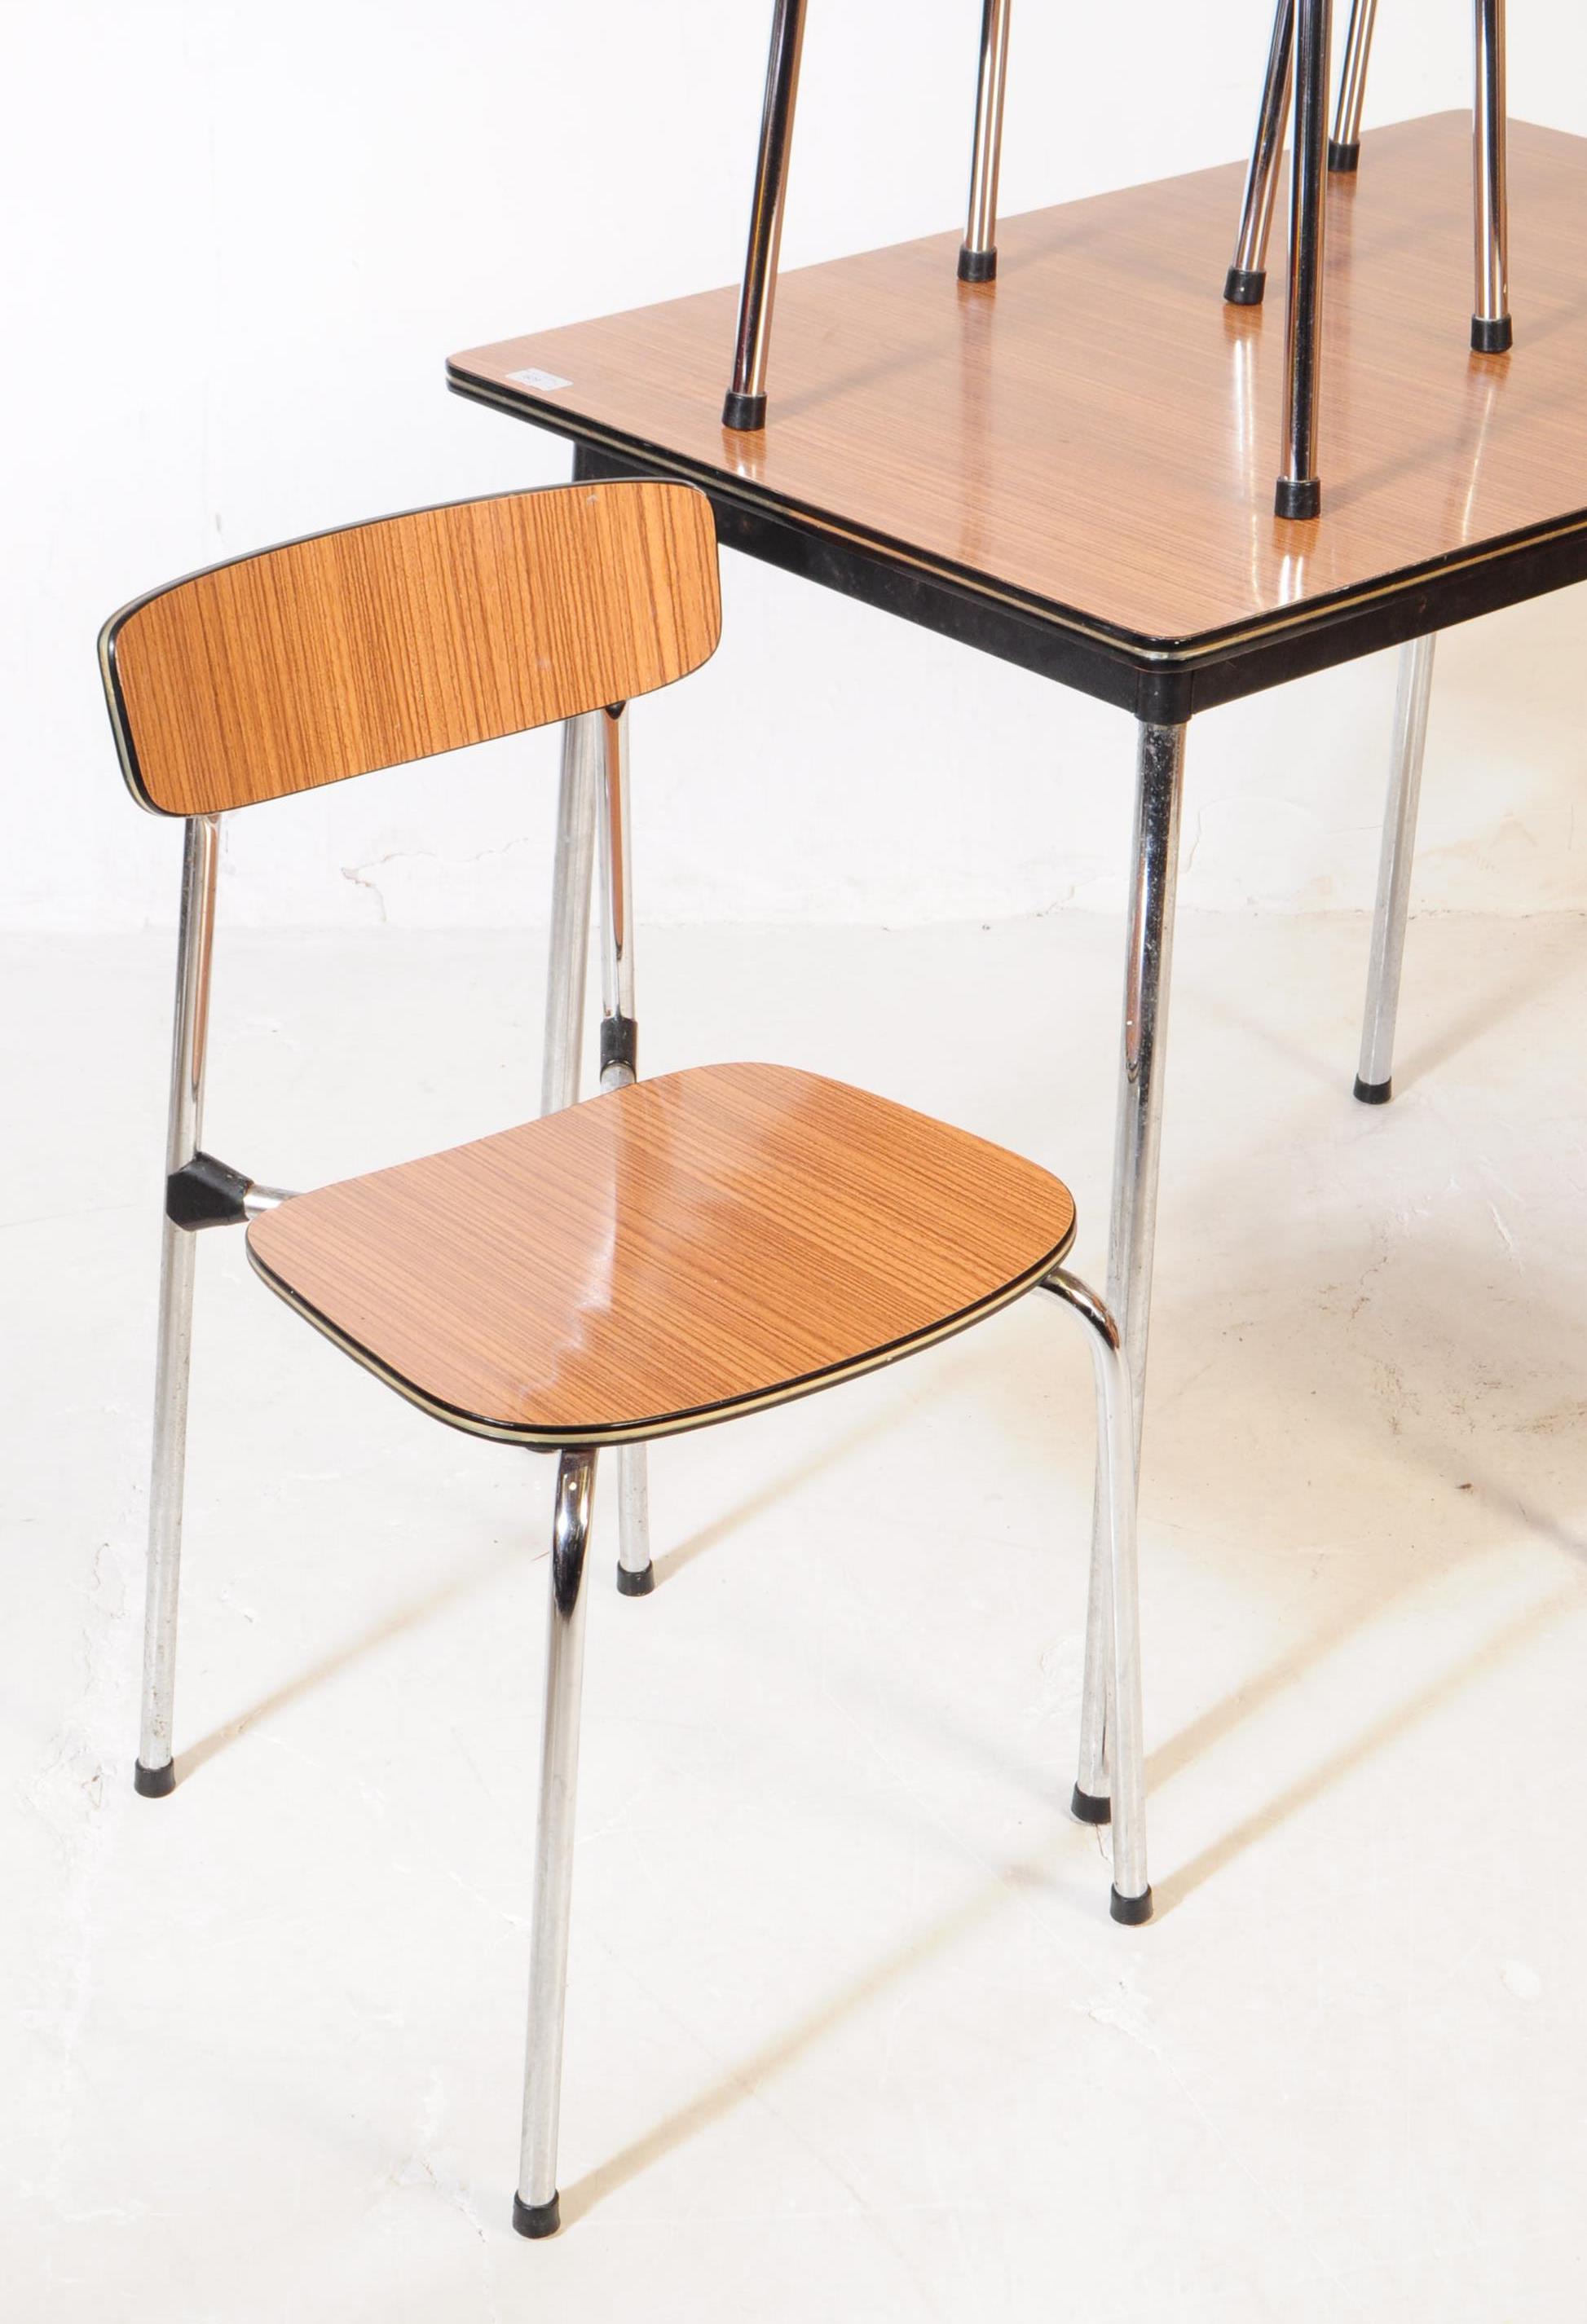 BRITISH MODERN DESIGN - FORMICA KITCHEN TABLE - CHAIRS - STOOLS - Image 3 of 9